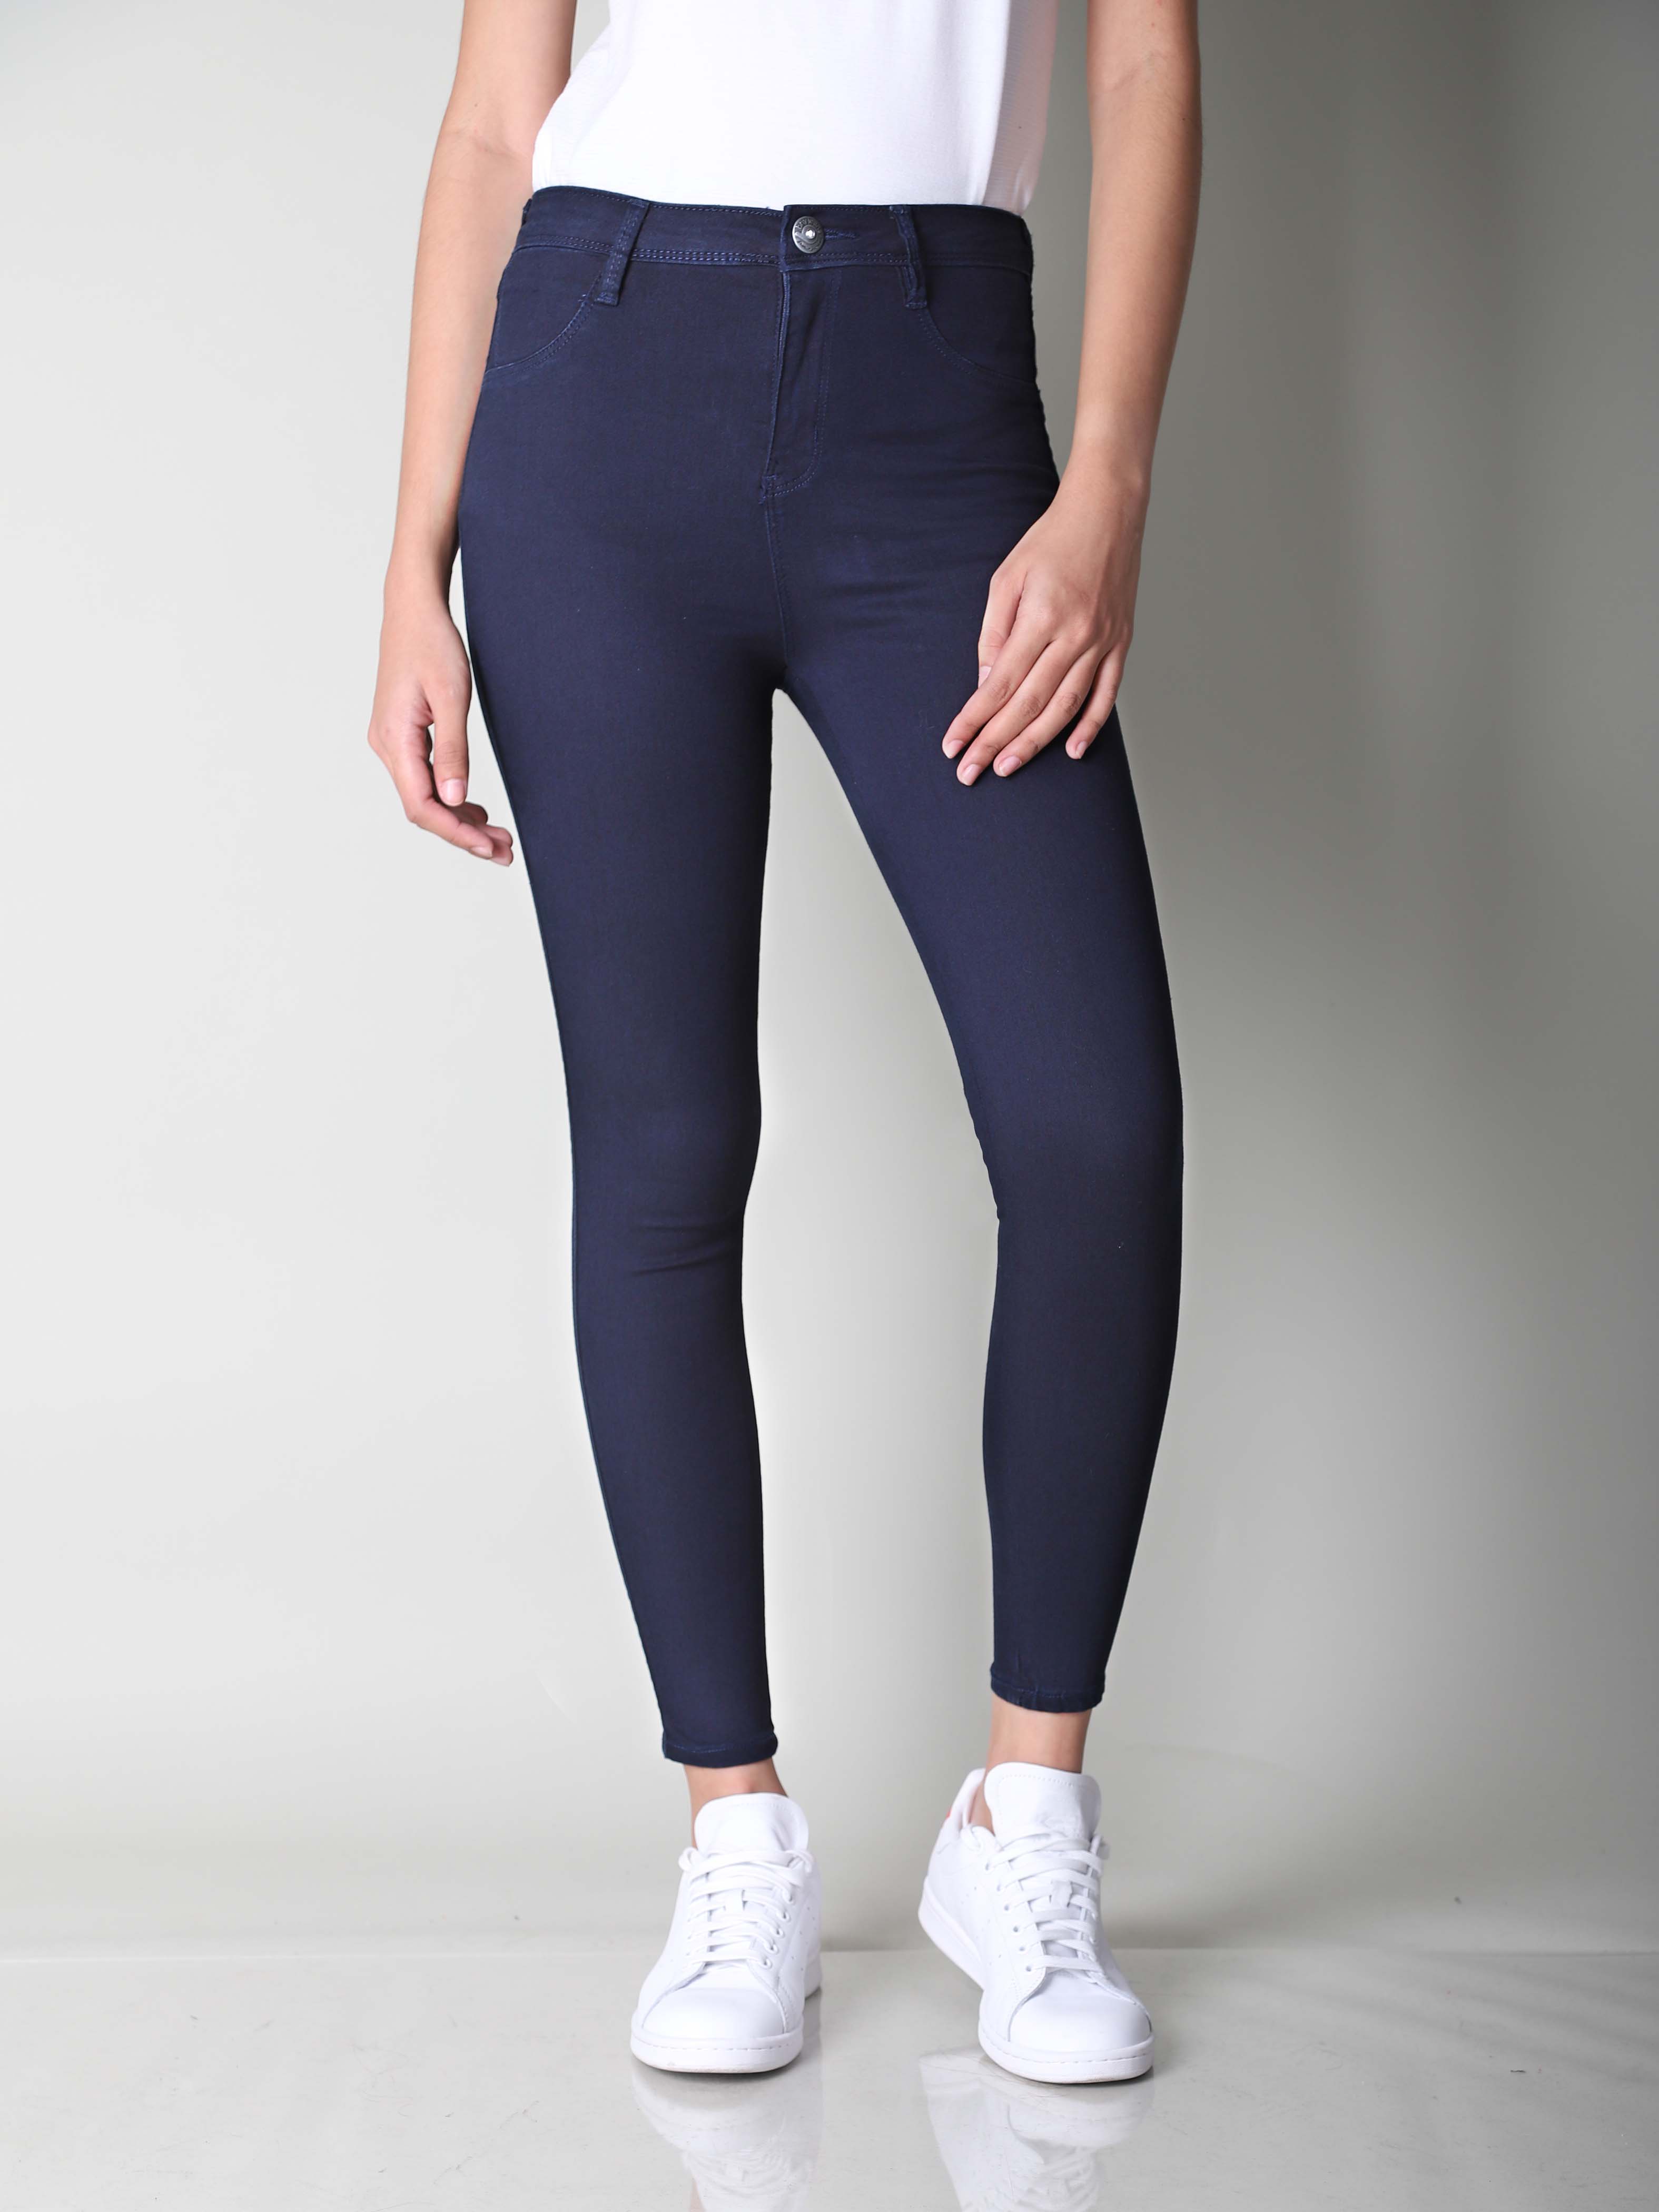 LADIES' HIGH RISE SKINNY POWER STRETCH BLUE (196) | BNY Jeans